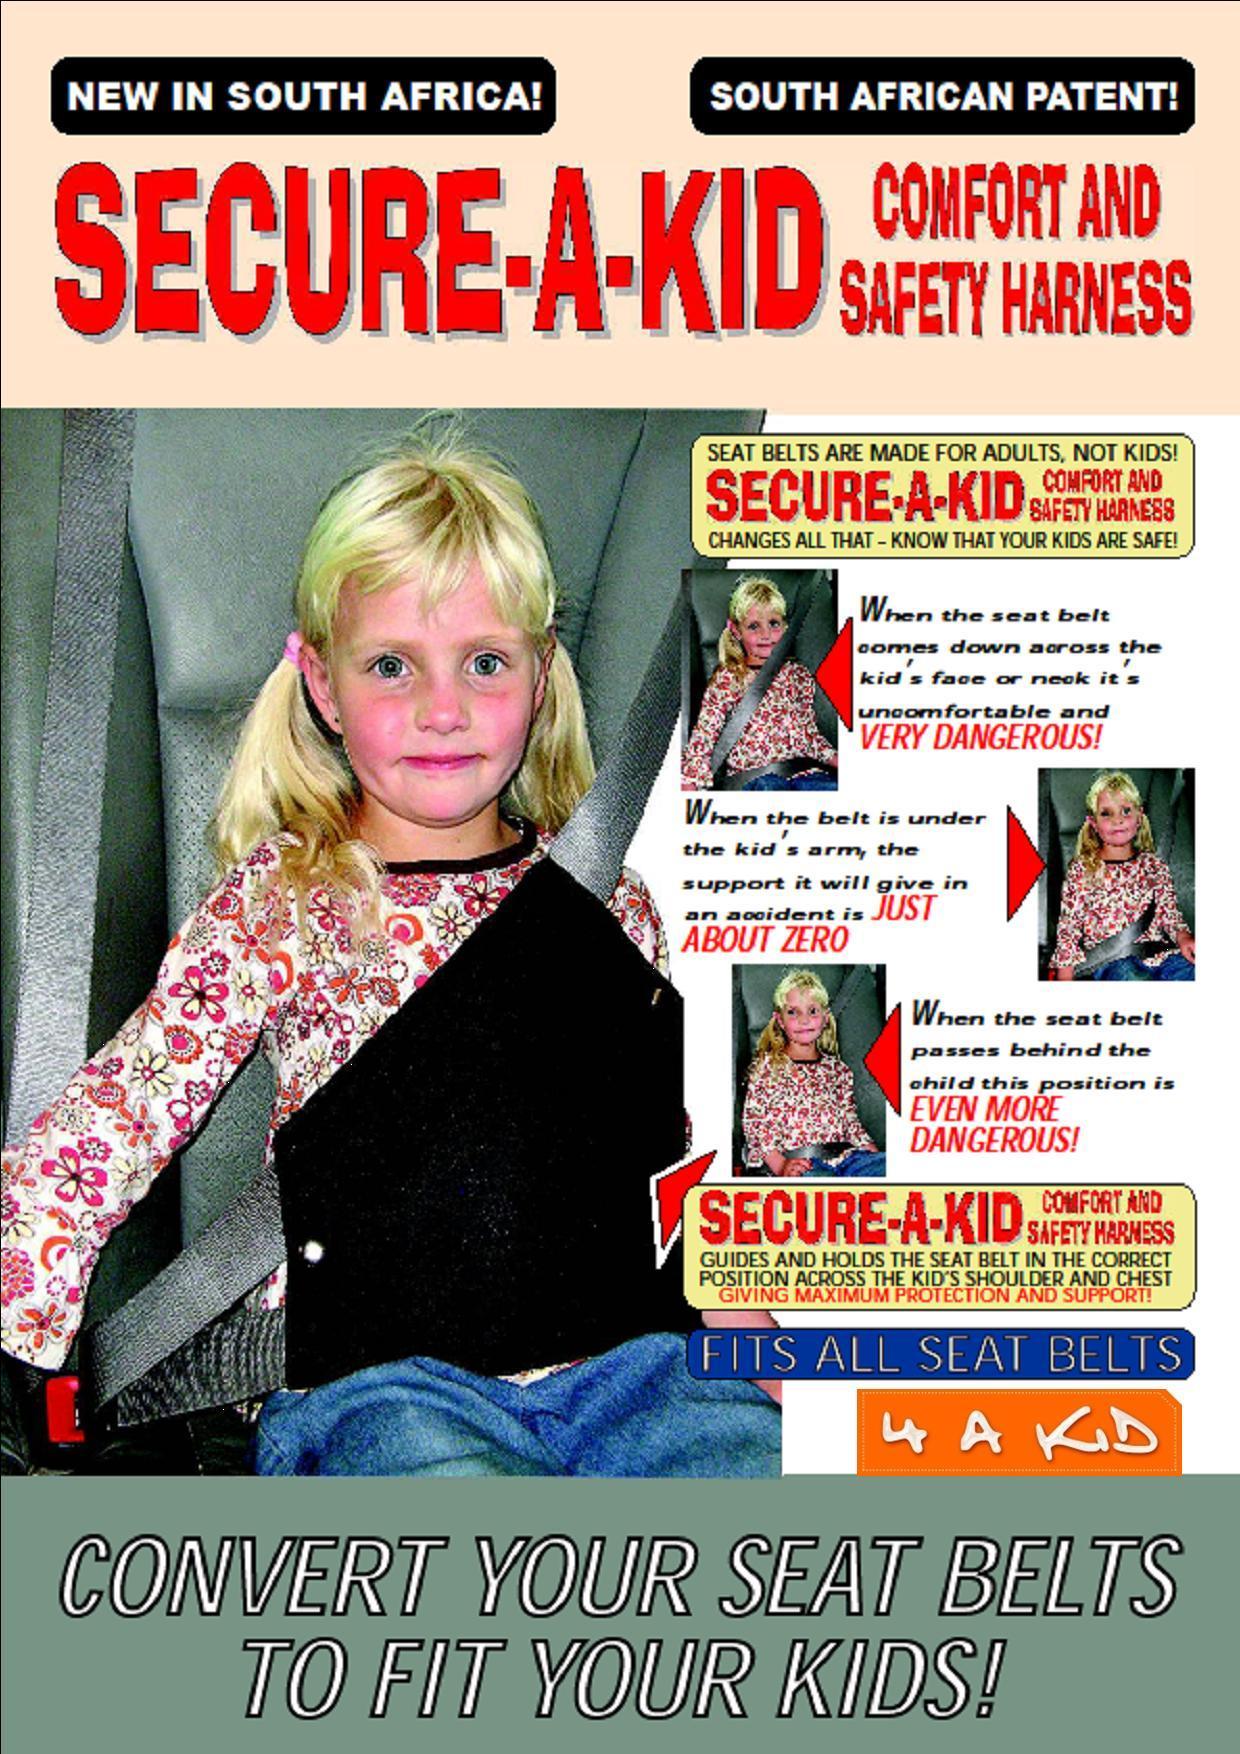 Secure-a-Kid Comfort Harness - Why Children Should Not Use Adult Seat Belts - 4aKid